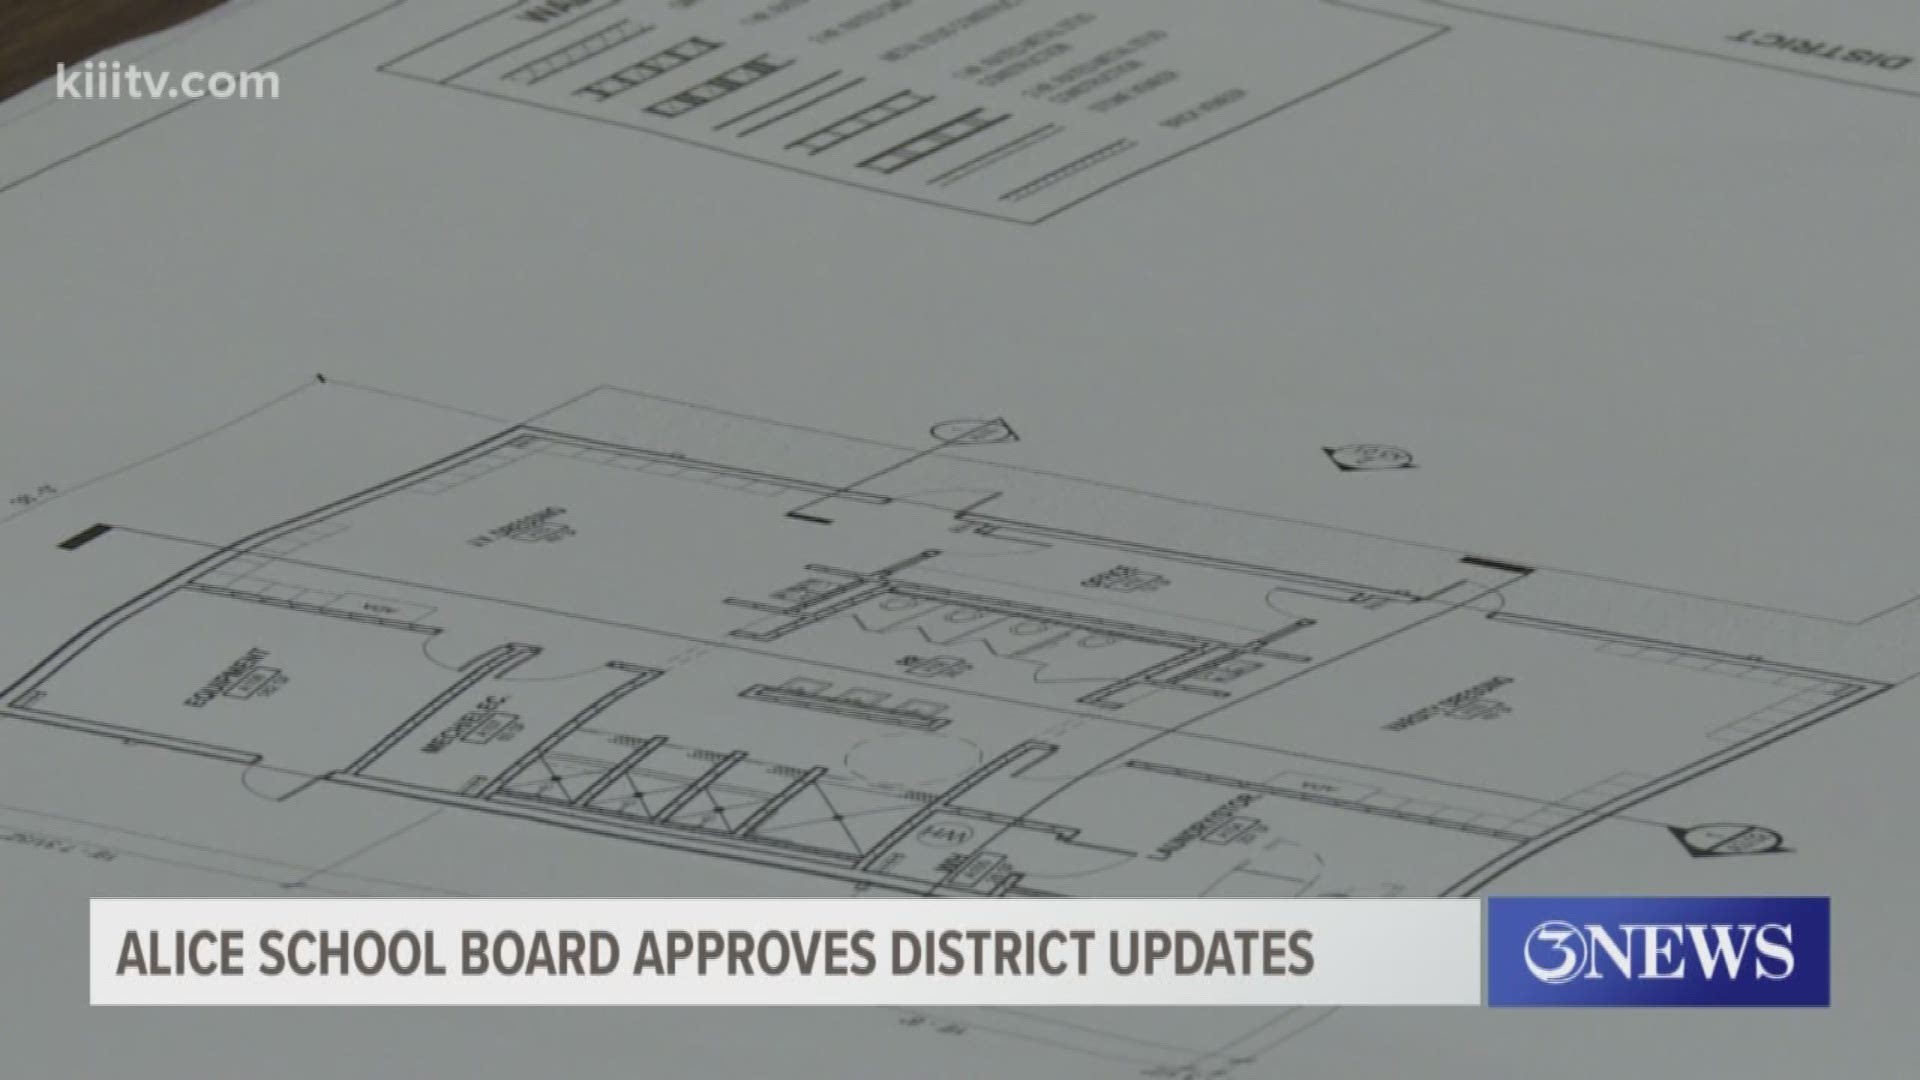 Alice school board approves district updates